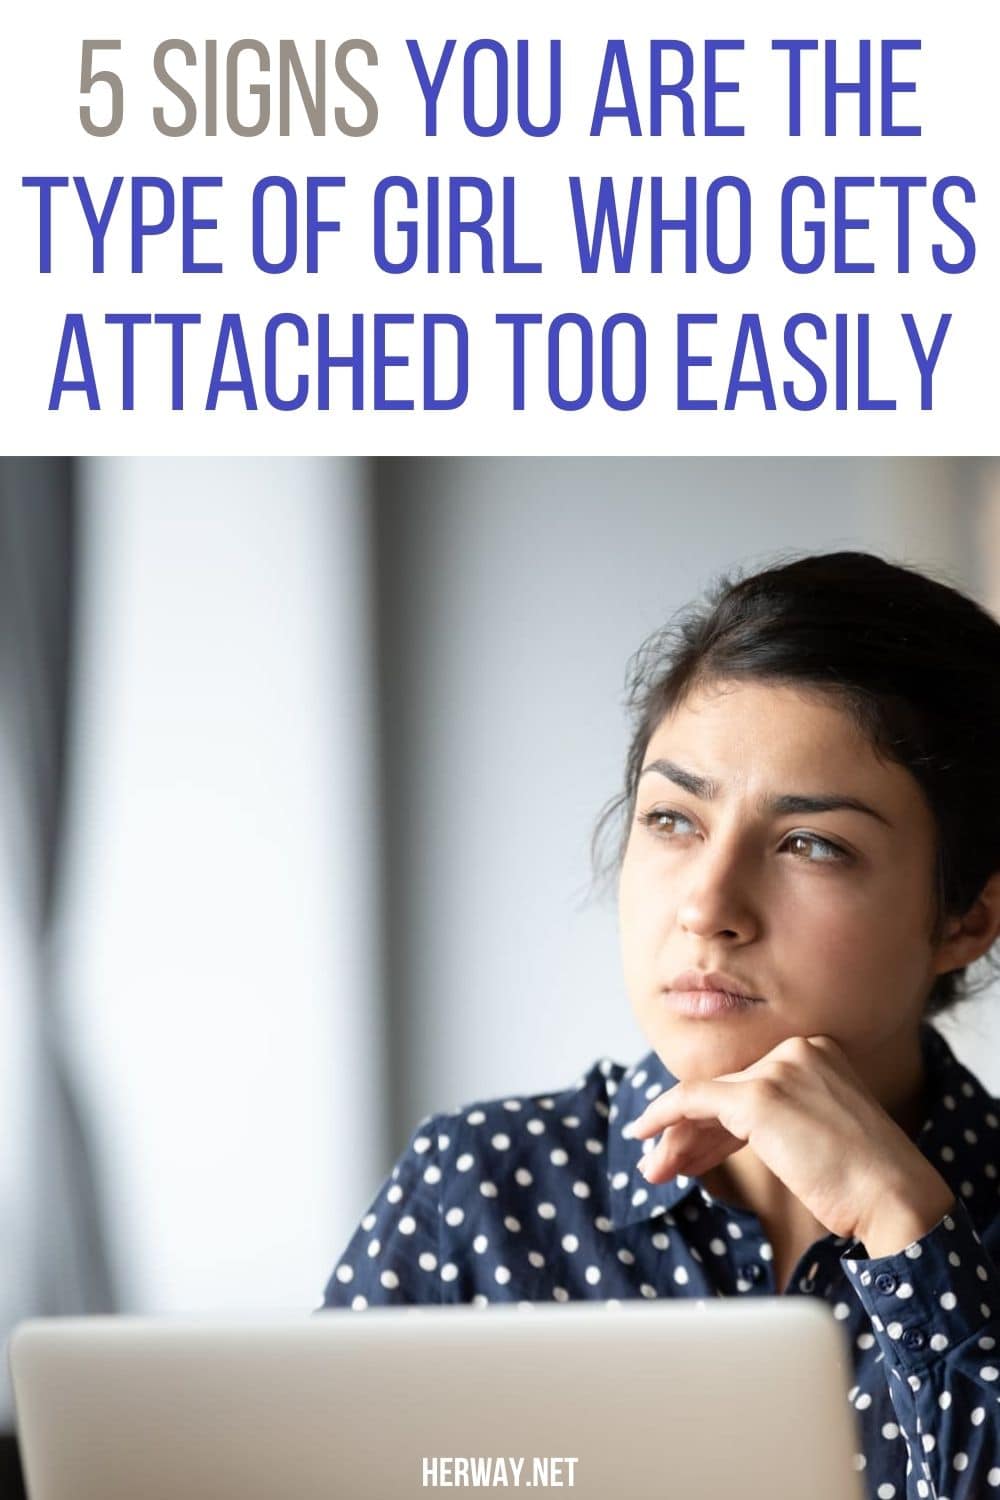 5 Signs You Are The Type Of Girl Who Gets Attached Too Easily